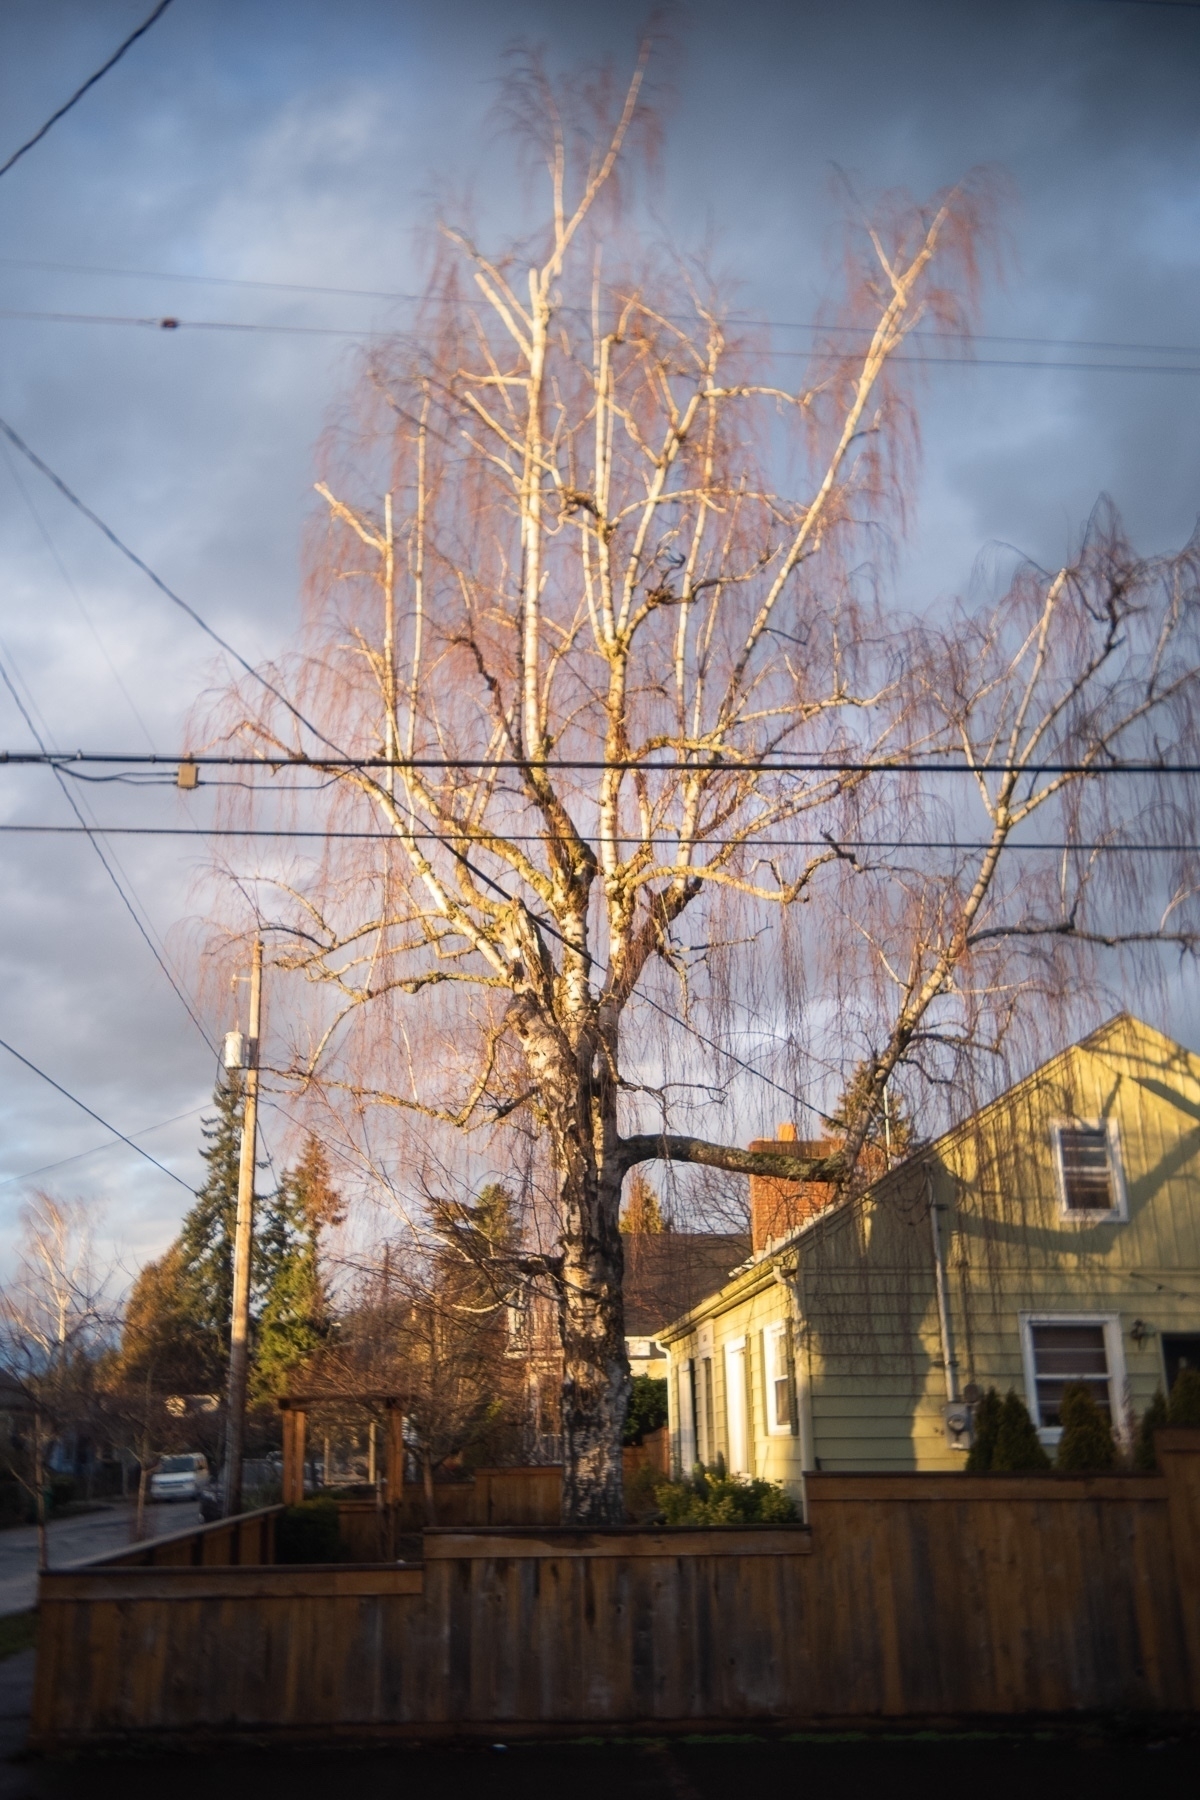 A tree with white bark and no leaves, standing in a house yard, is lit by the golden light of the setting Sun.